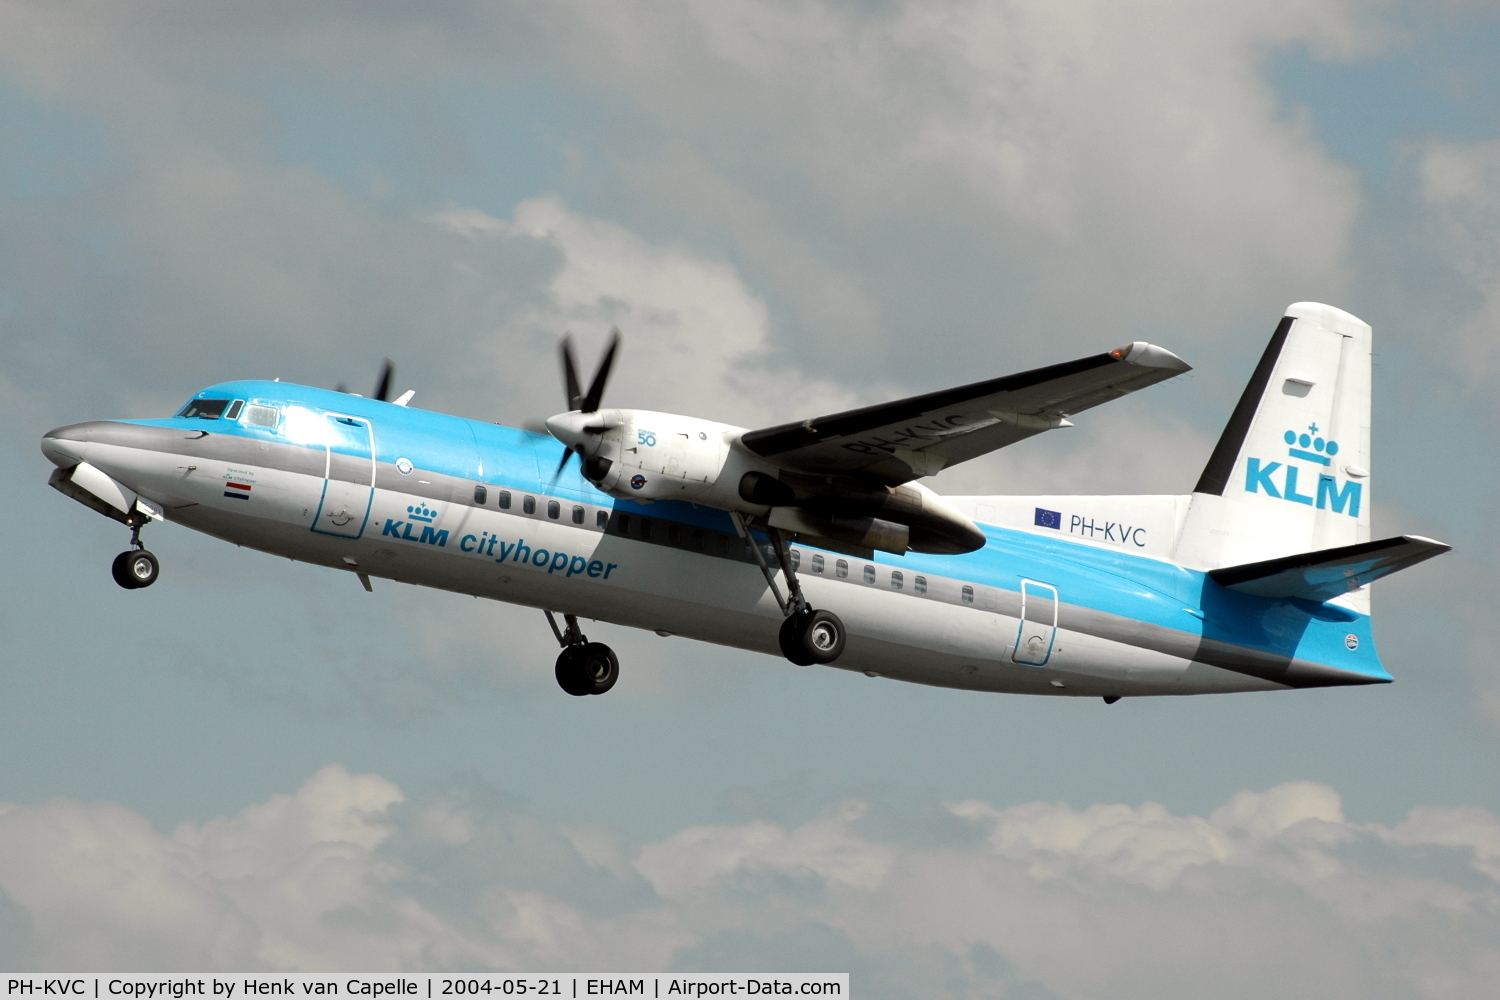 PH-KVC, 1990 Fokker 50 C/N 20191, KLM Fokker 50 retracting its landing gear after take off from Schiphol airport.